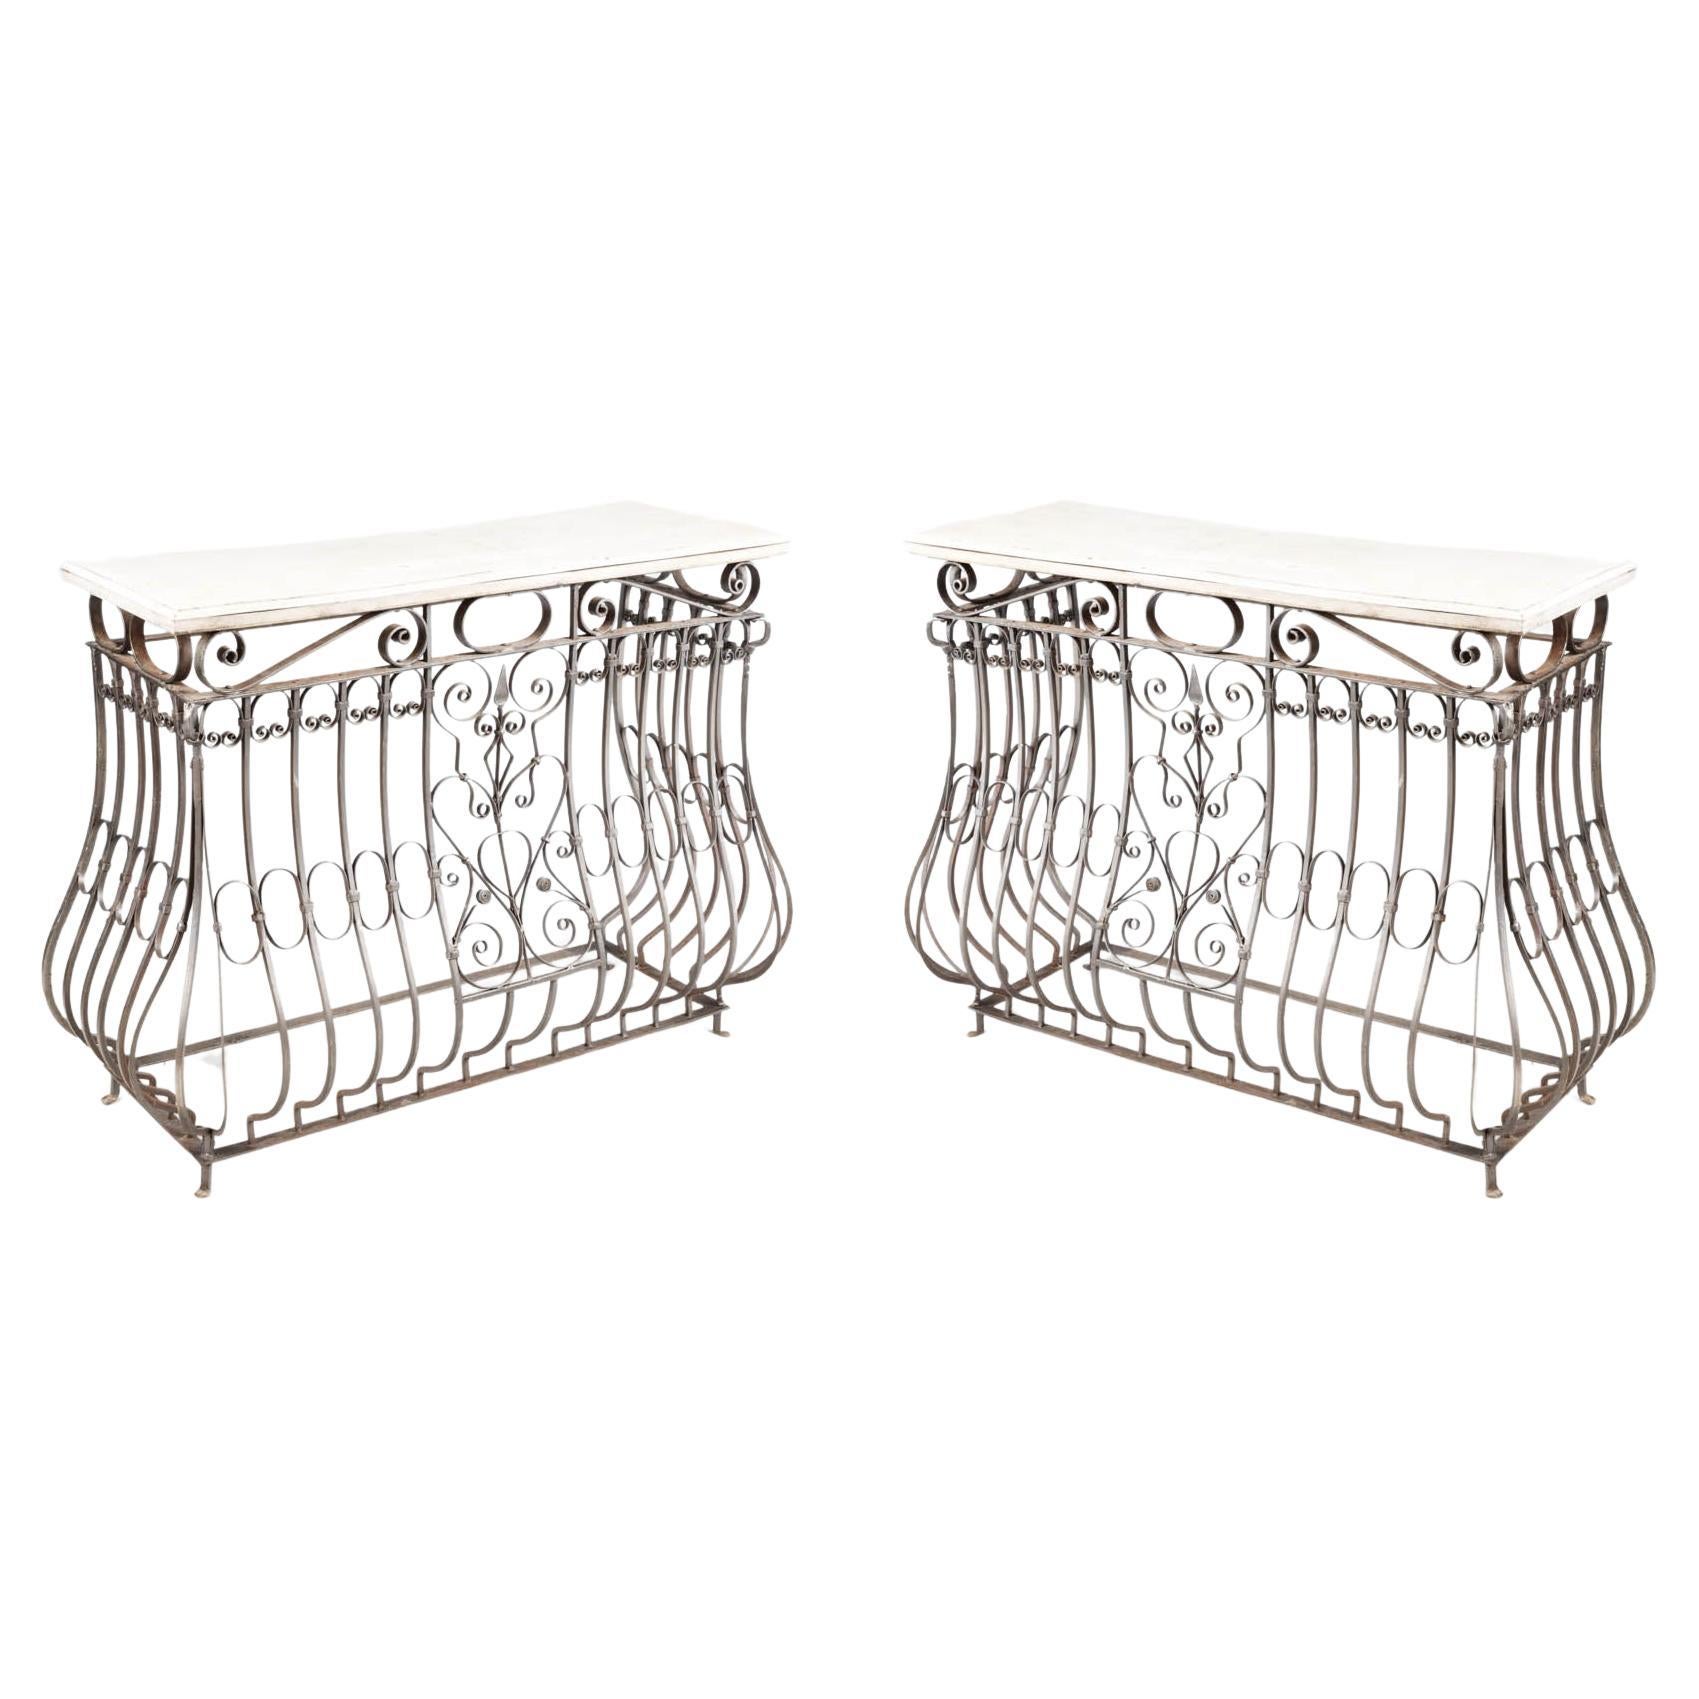 Pair early 20th Century Decorative Balconies Re-styled as Console Tables For Sale